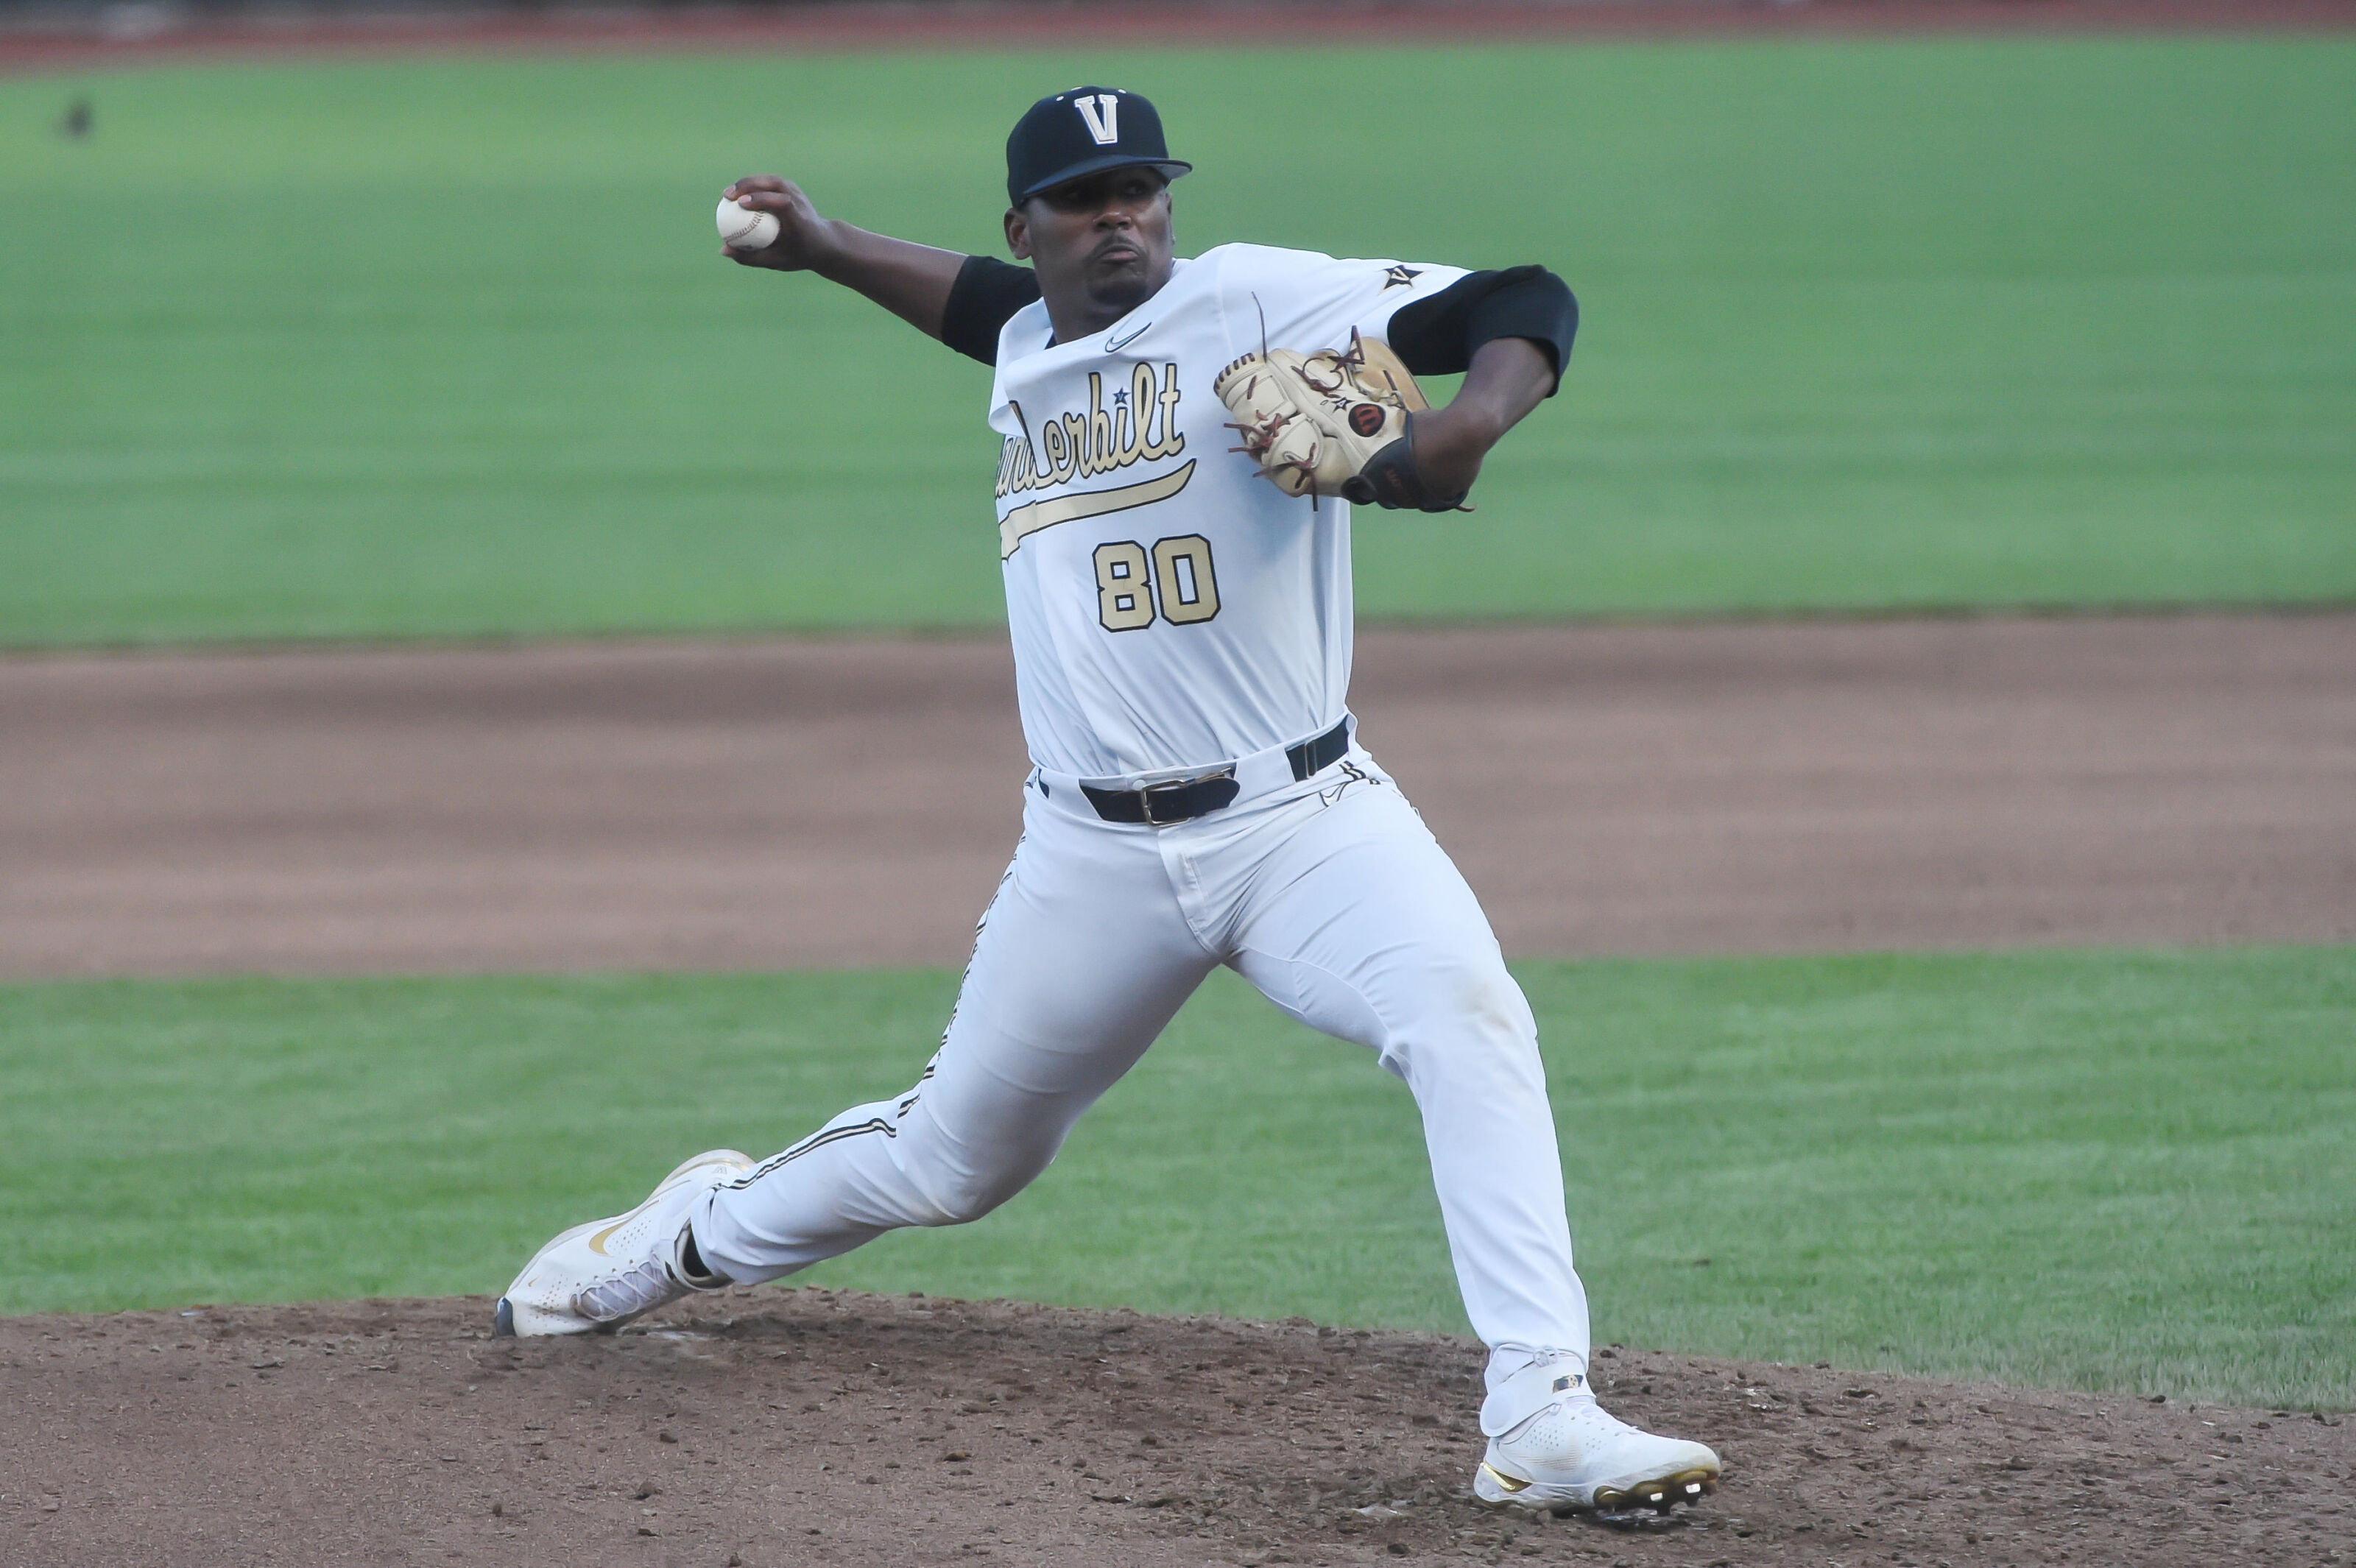 Mets draft pick Kumar Rocker to pitch for Tri-City ValleyCats in